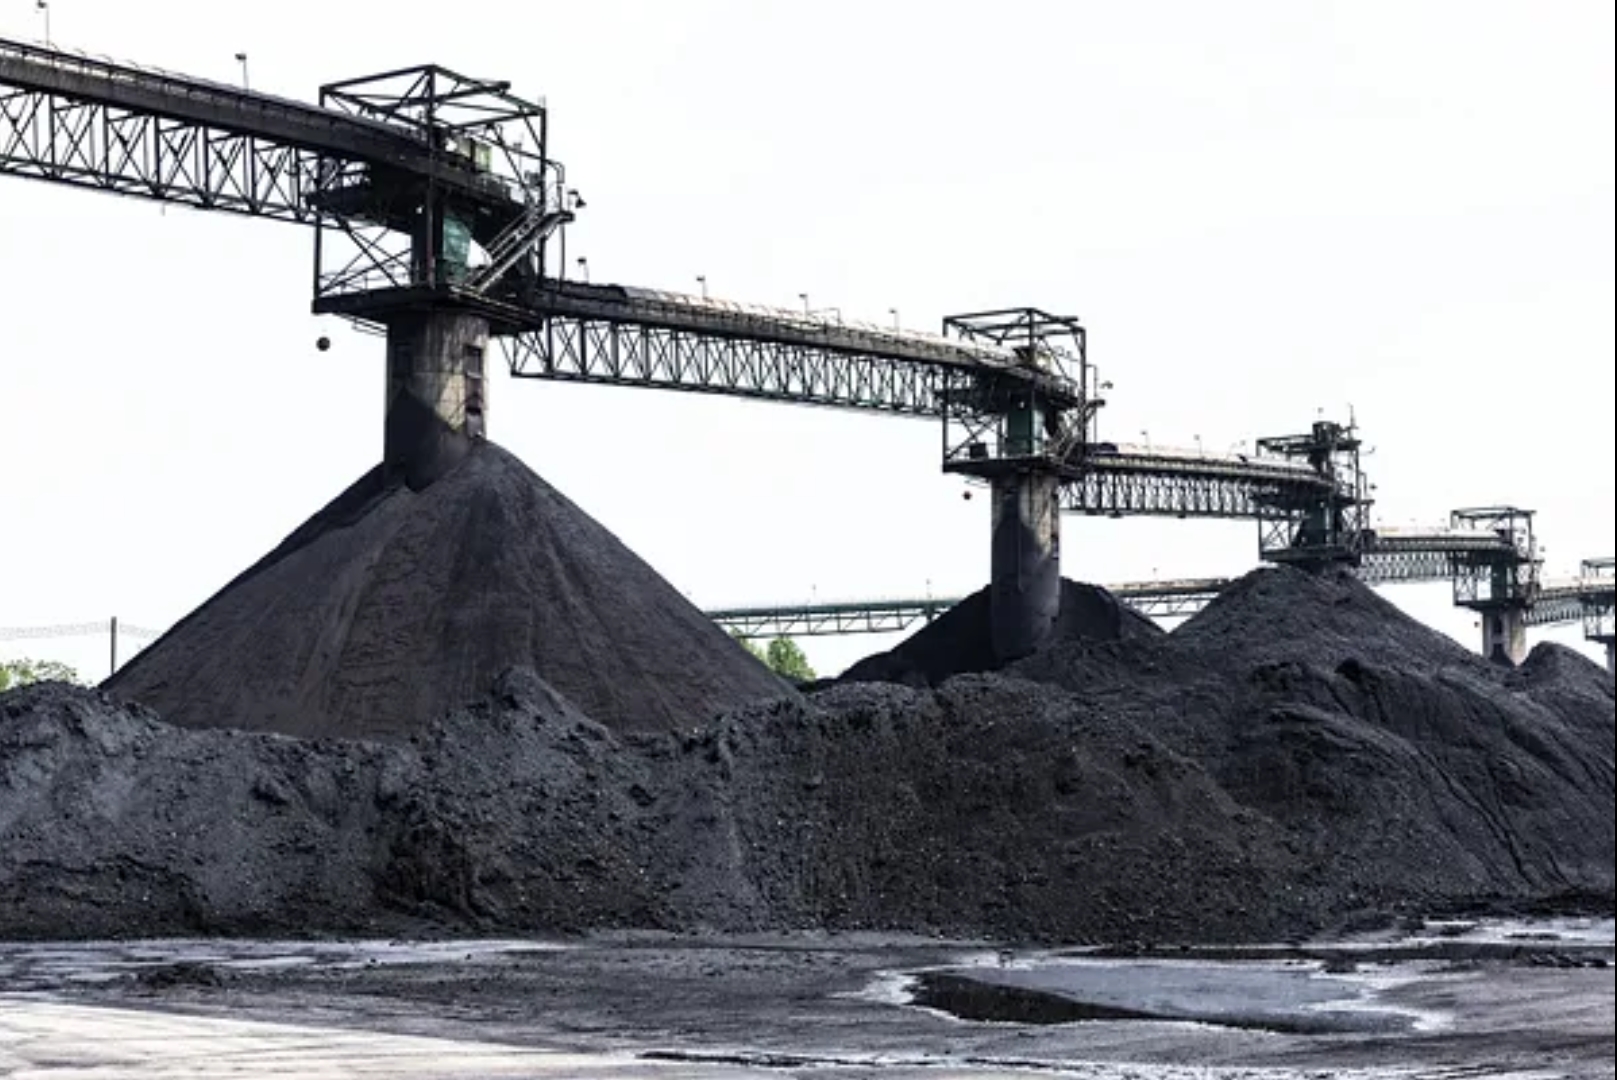 Coal ministry to conduct auction of 39 mines in five states on Nov. 15